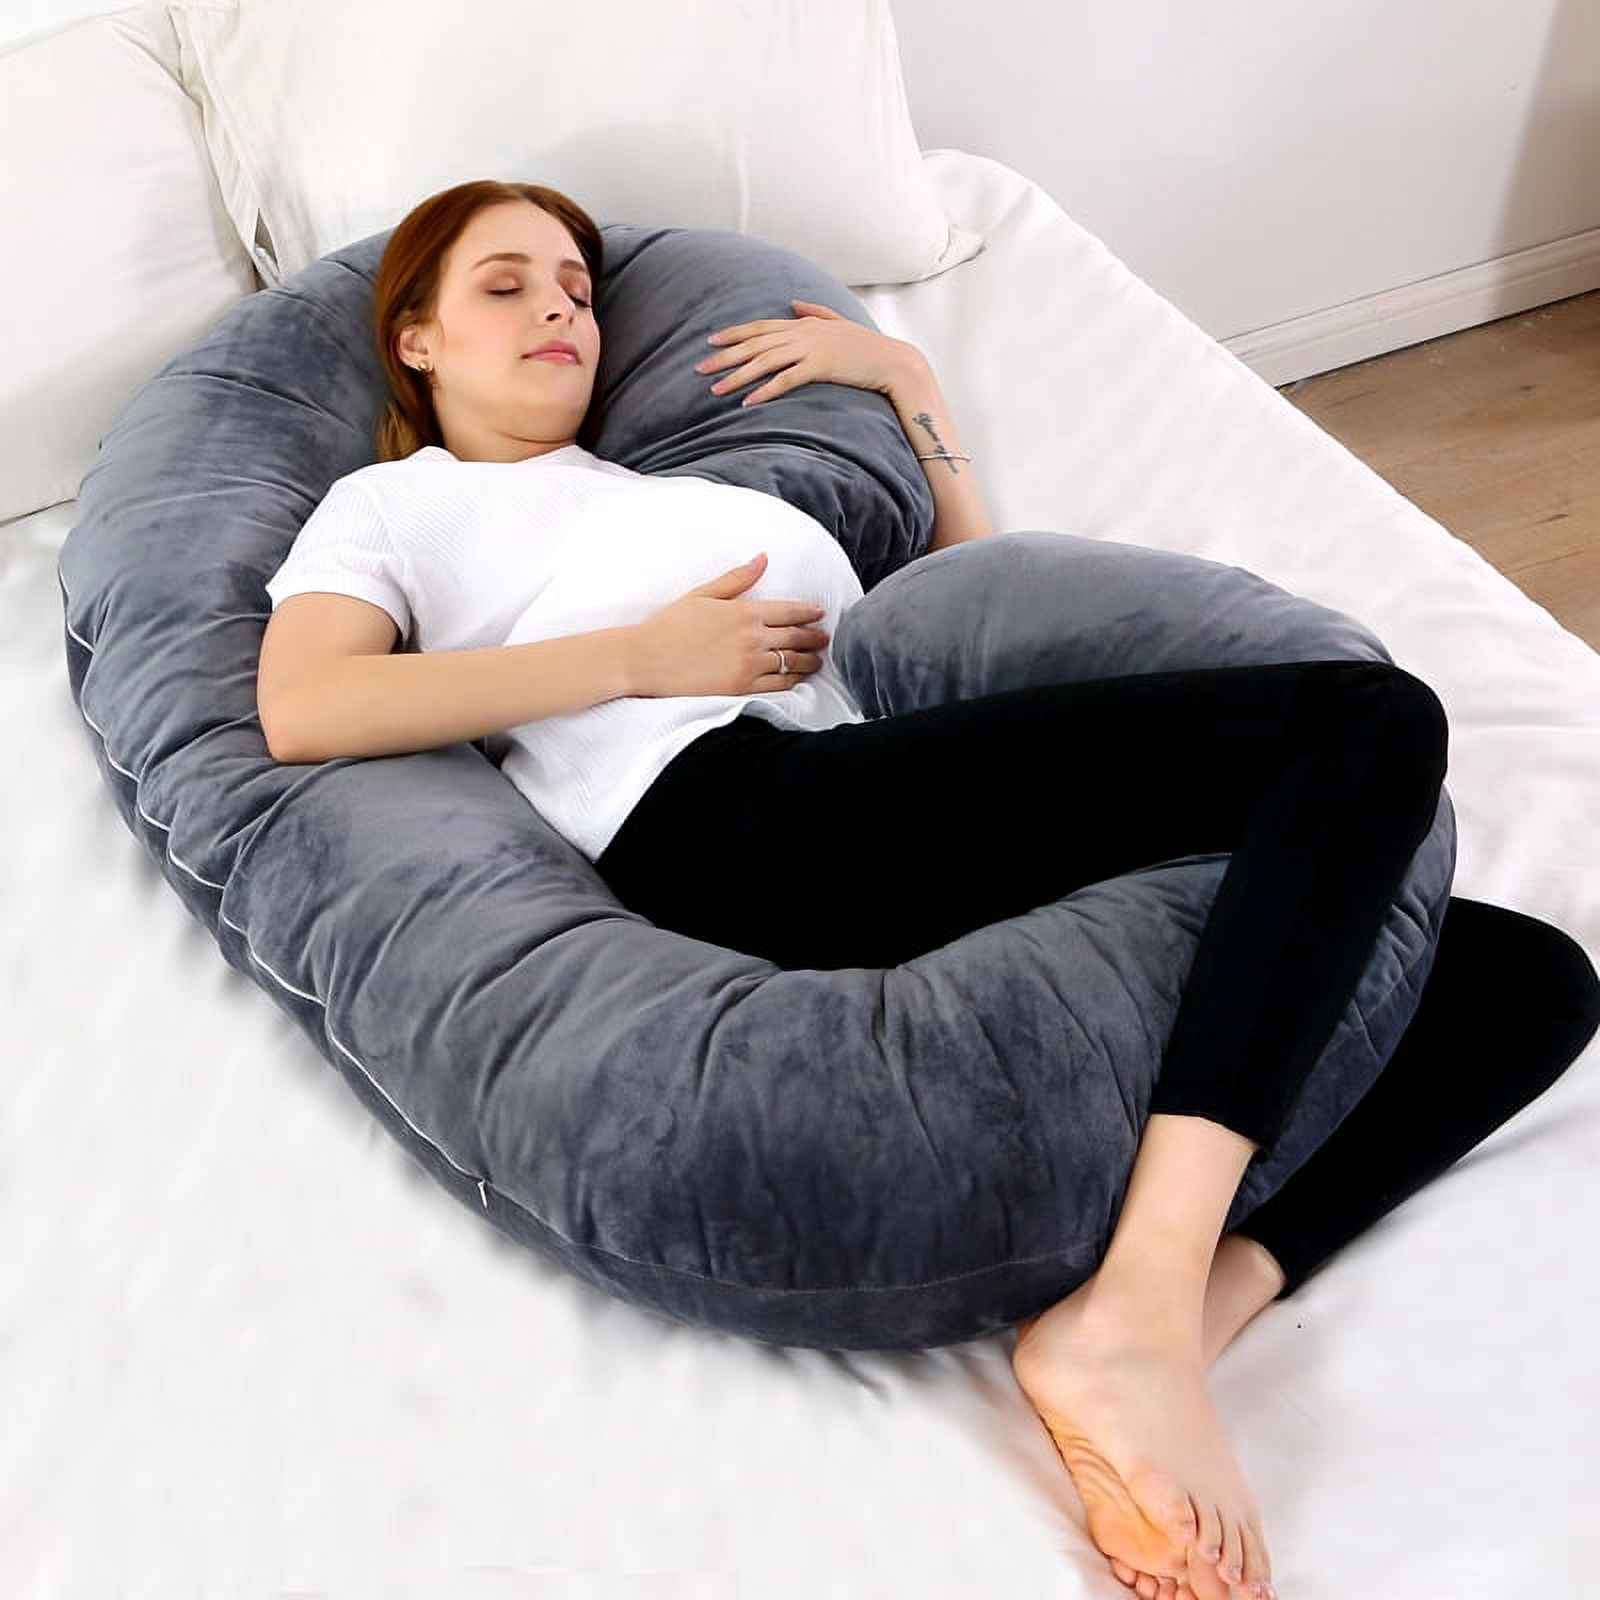 Restorology, Pregnancy Pillow - 60 Inch, C-Shaped Maternity Pillows for  Sleeping - Full Body Pillow for Pregnant Women - Reduces Hip, Back Pain for